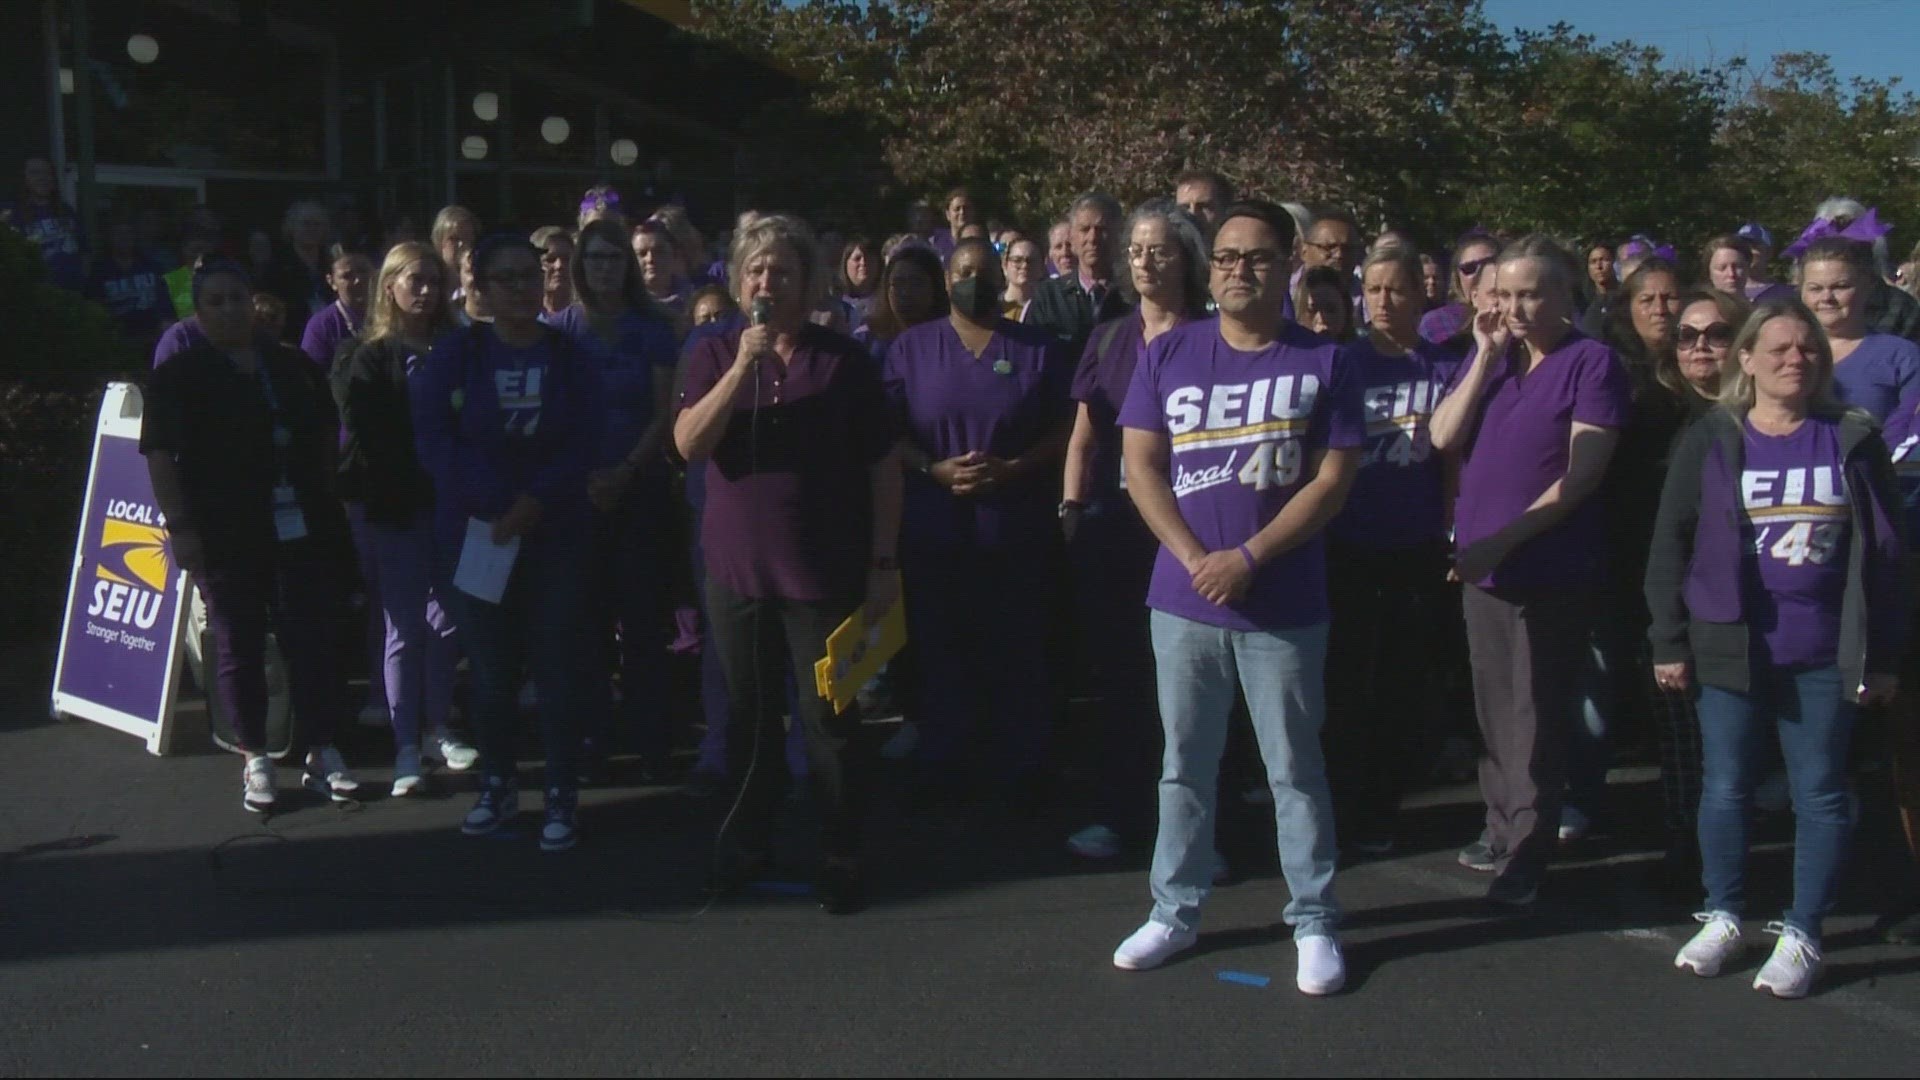 The vote allows the union's bargaining team to call a strike at any time after Sept. 30, although the union will give Kaiser 10 days advance notice.